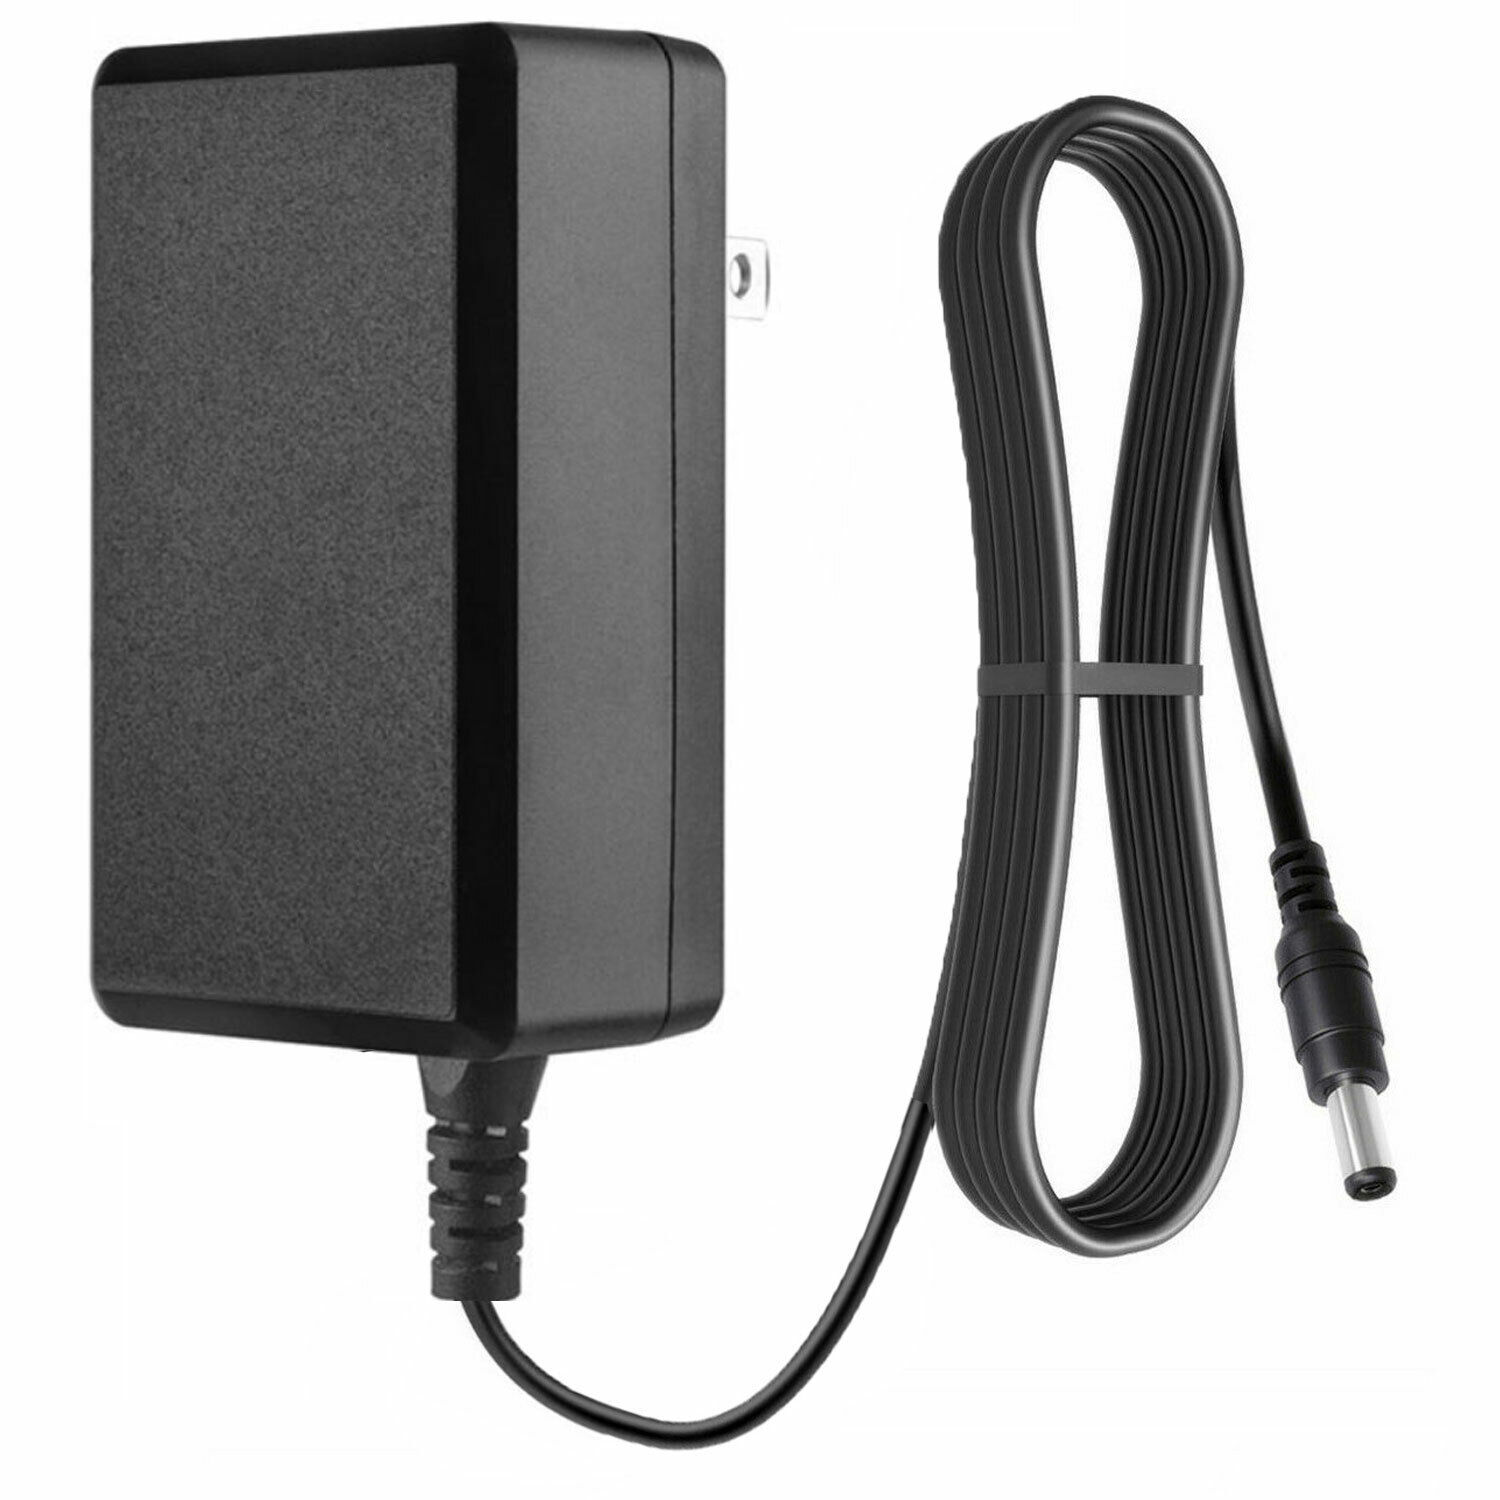 *Brand NEW* for Alesis M-EQ230 Graphic Equalizer 9V AC-AC Adapter Power Supply Cord Charger